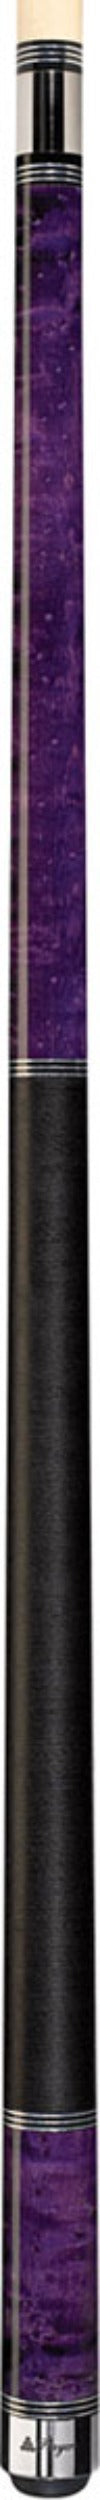 Players C-965 Pool Cue -Players